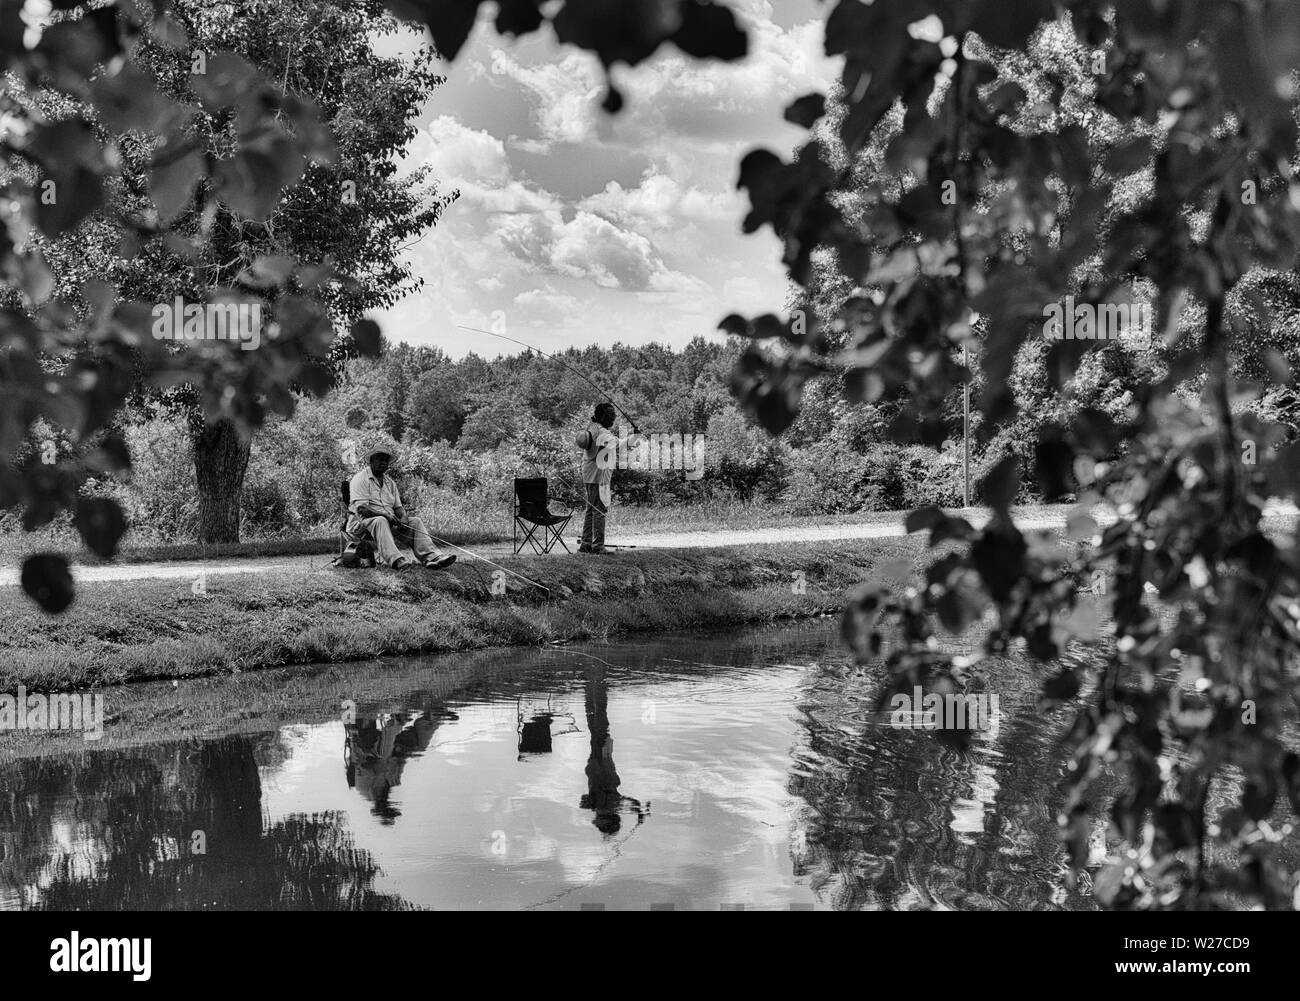 A couple fishing at a lake in Fayette, Al. Stock Photo